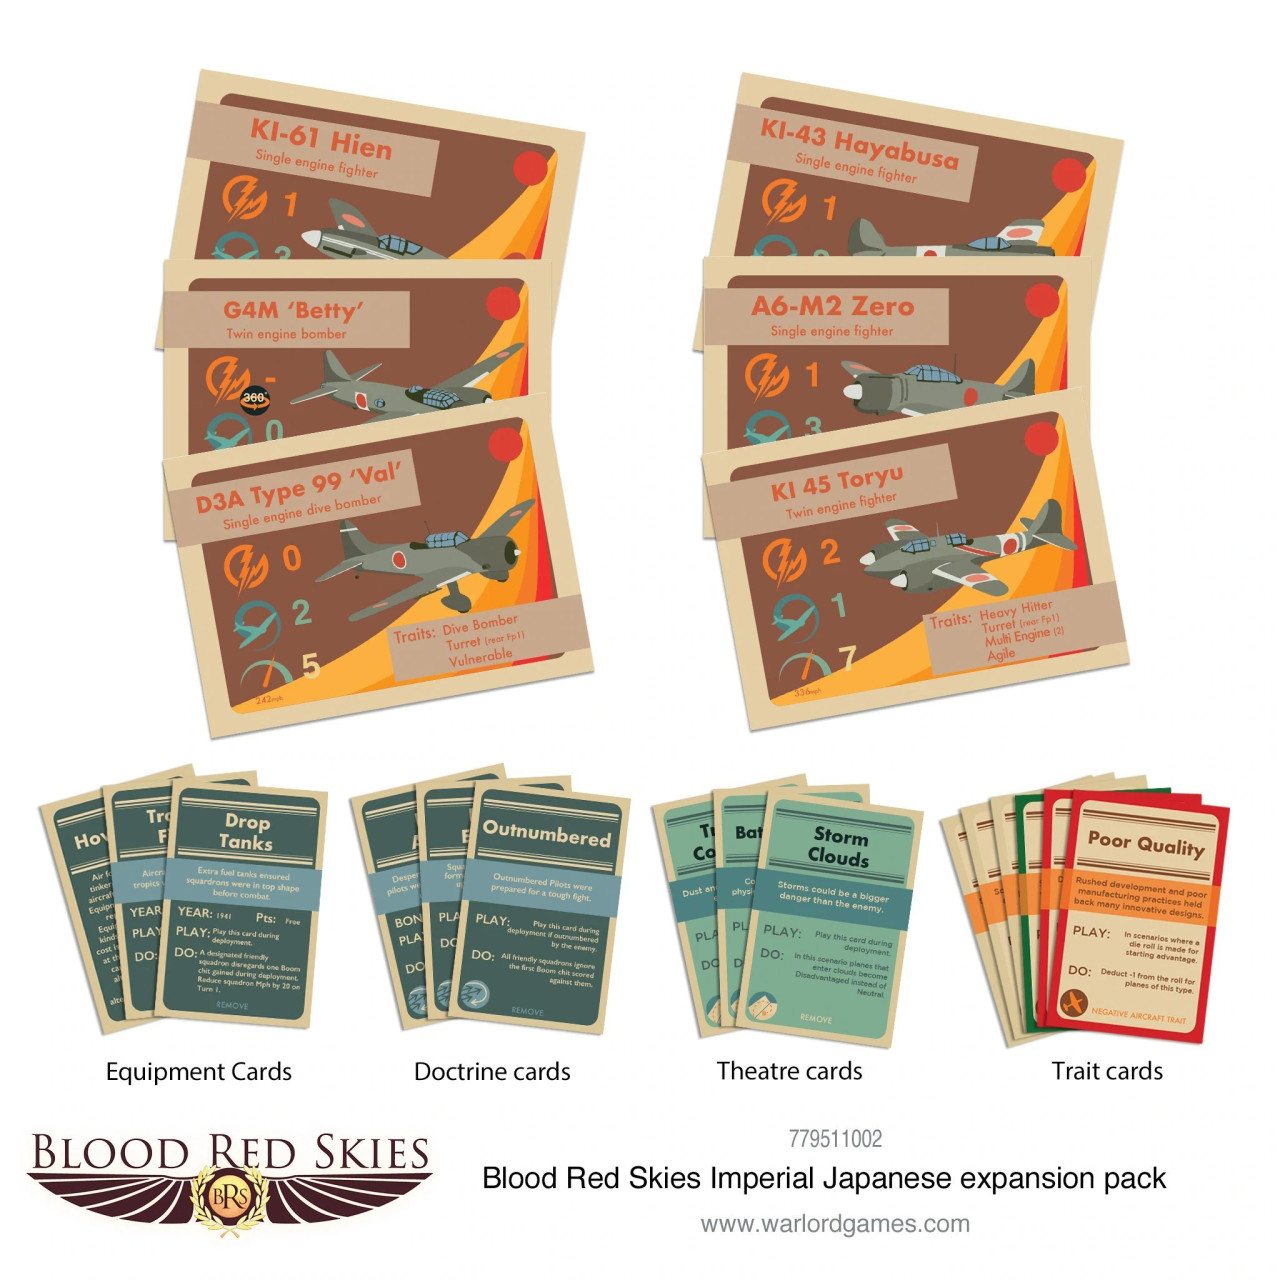 Blood Red Skies - Imperial Japanese Expansion Pack